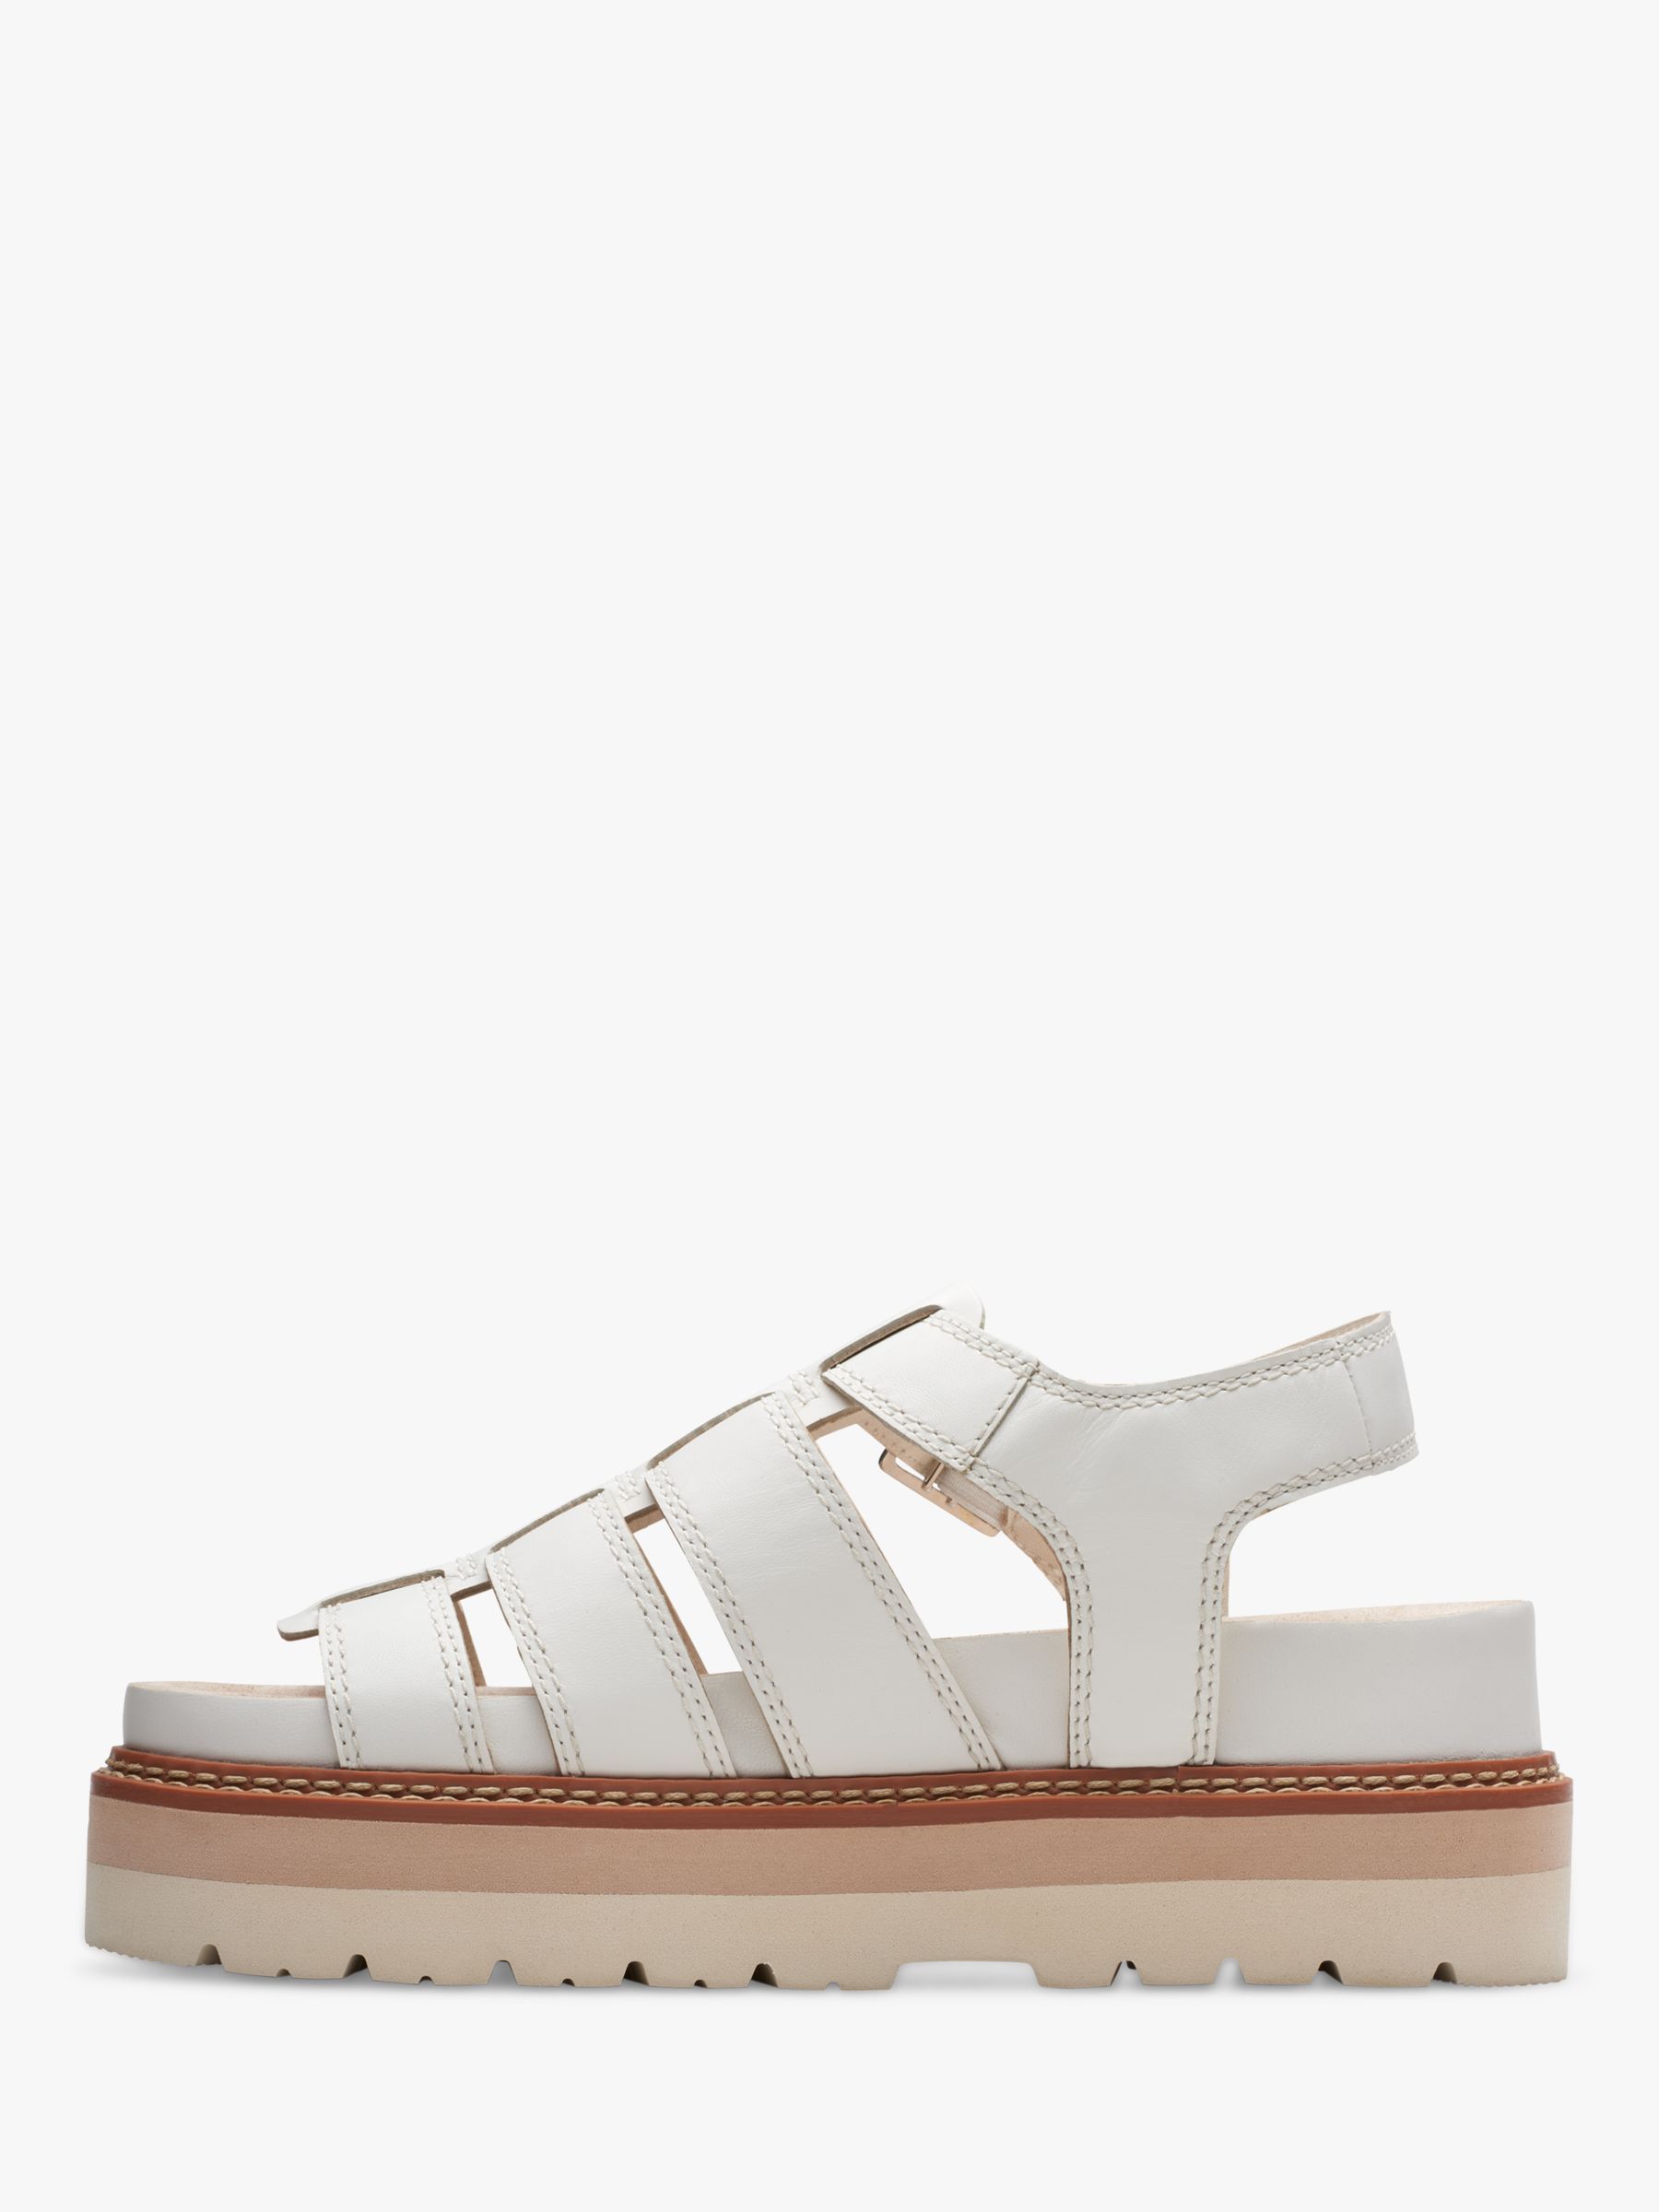 Clarks Orianna Twist Leather Caged Sandals, Off White Lea at John Lewis ...